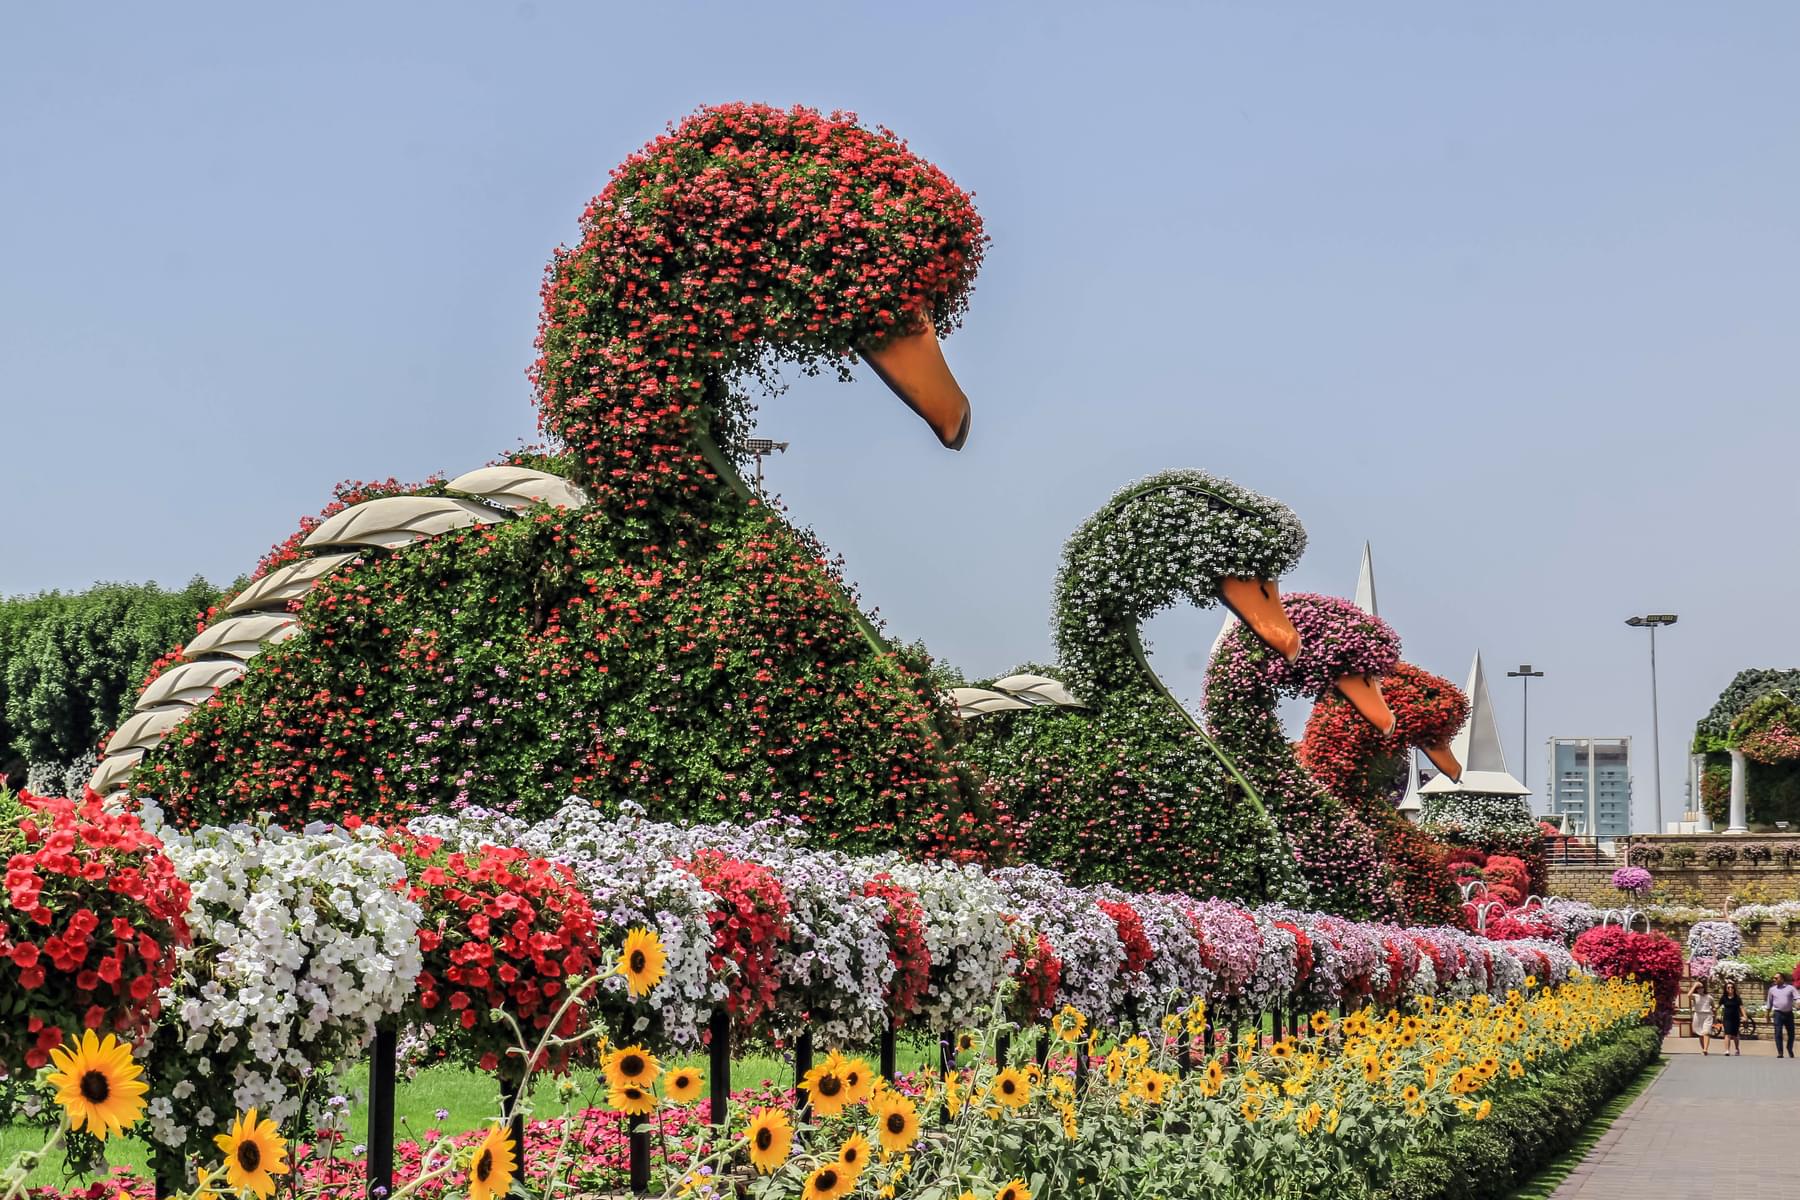  The Biggest And Tallest Topiary Art In The World